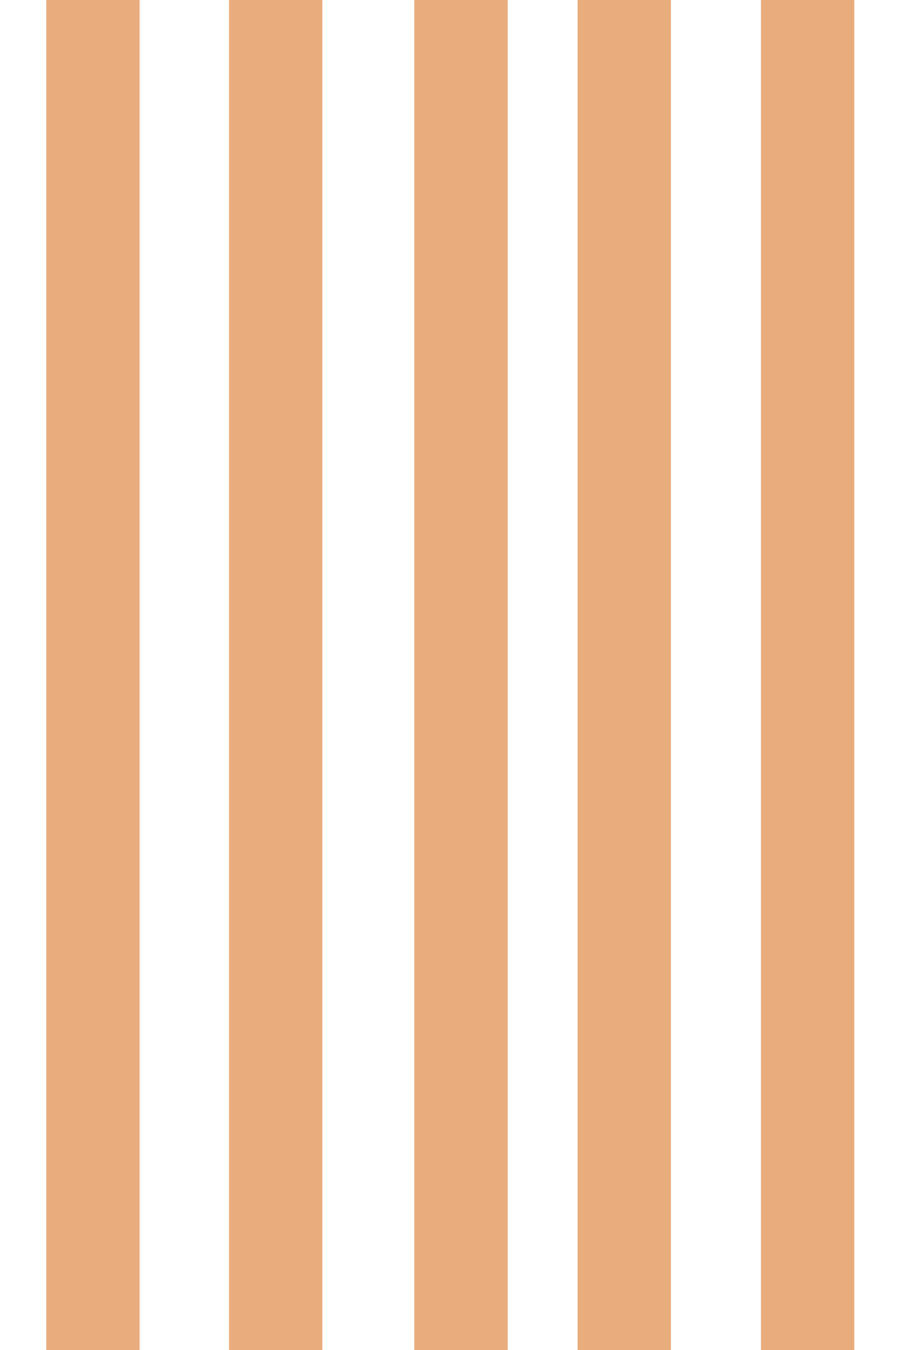 Woolf With Me Fitted Crib Sheet Stripes color_apricot